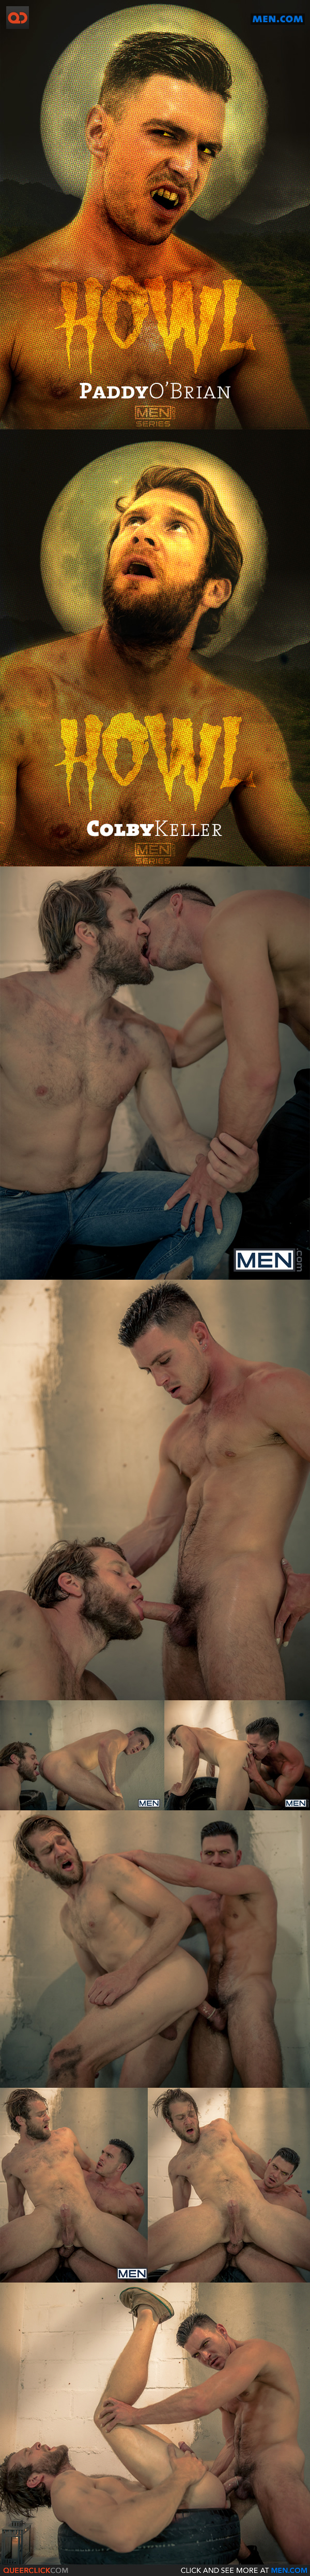 Men.com: Howl Part 1 with Paddy O'Brian & Colby Keller